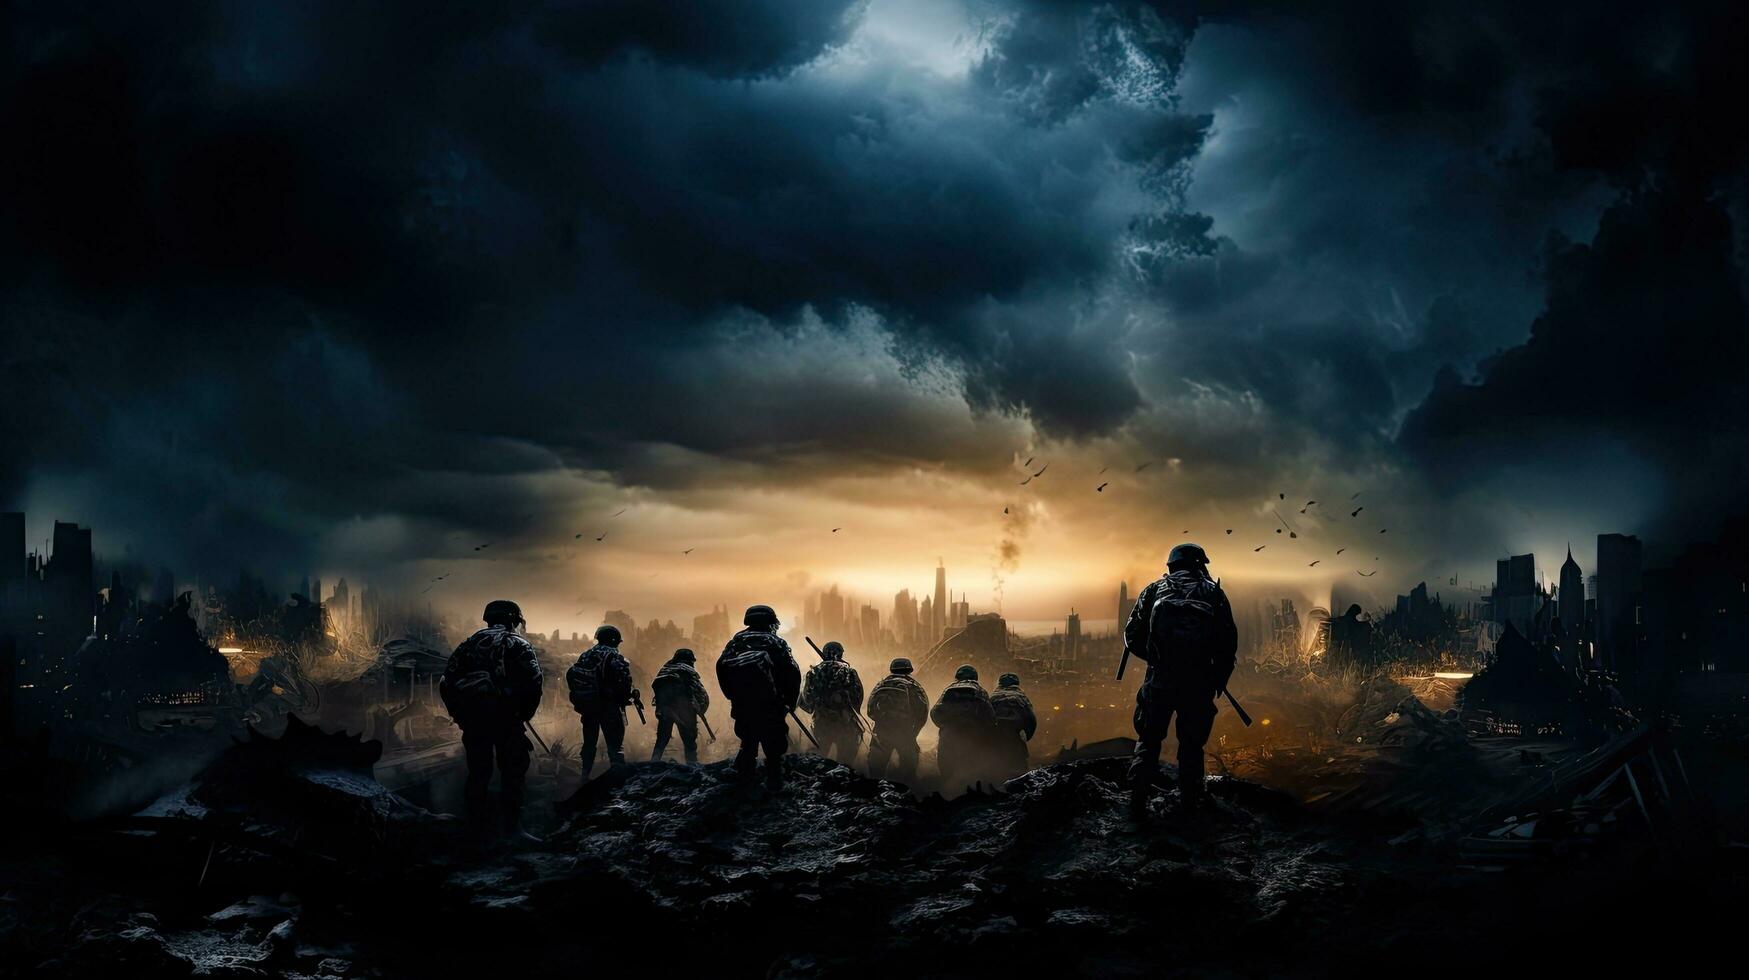 War scene with silhouette soldiers fighting in a ruined city under a cloudy sky photo